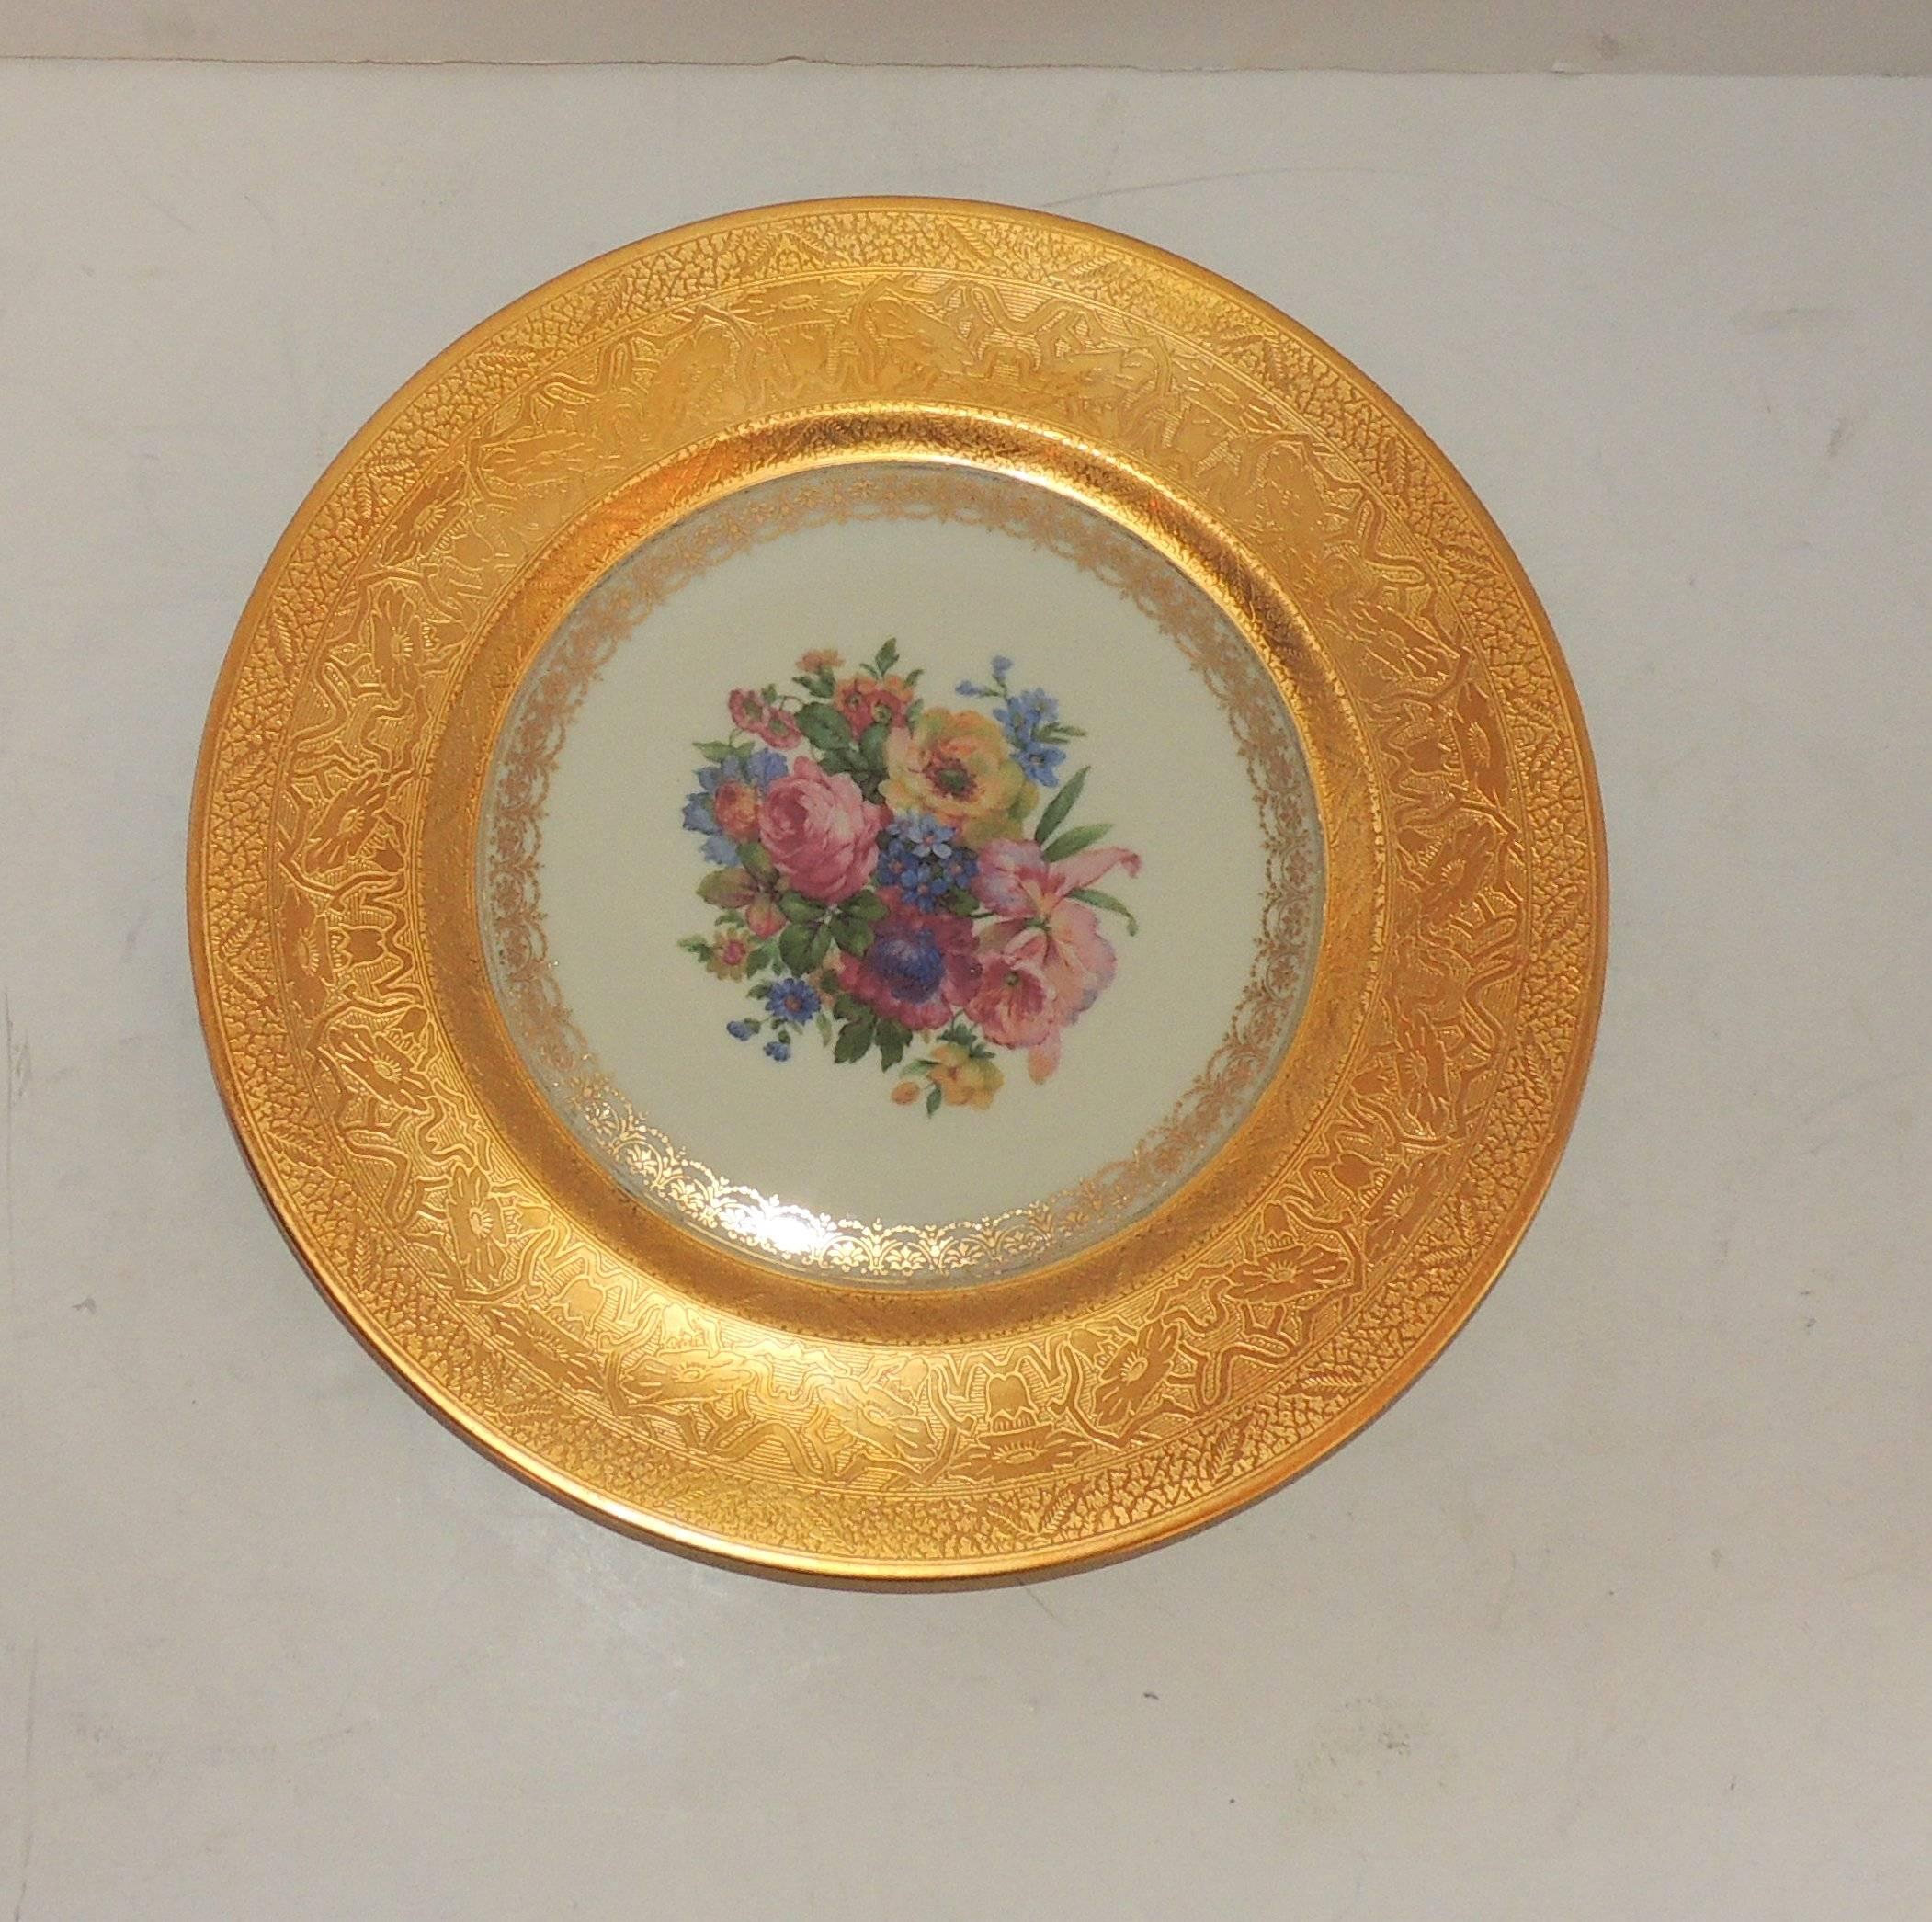 Set of 12 Heinrich & Co. Selb Bavaria Gold Encrusted Floral 11" Dinner Plates

2.25 inch Gold encrusted dinner plates with filigree interior trim and multi-color floral centre.

All in used, very lightly used condition.